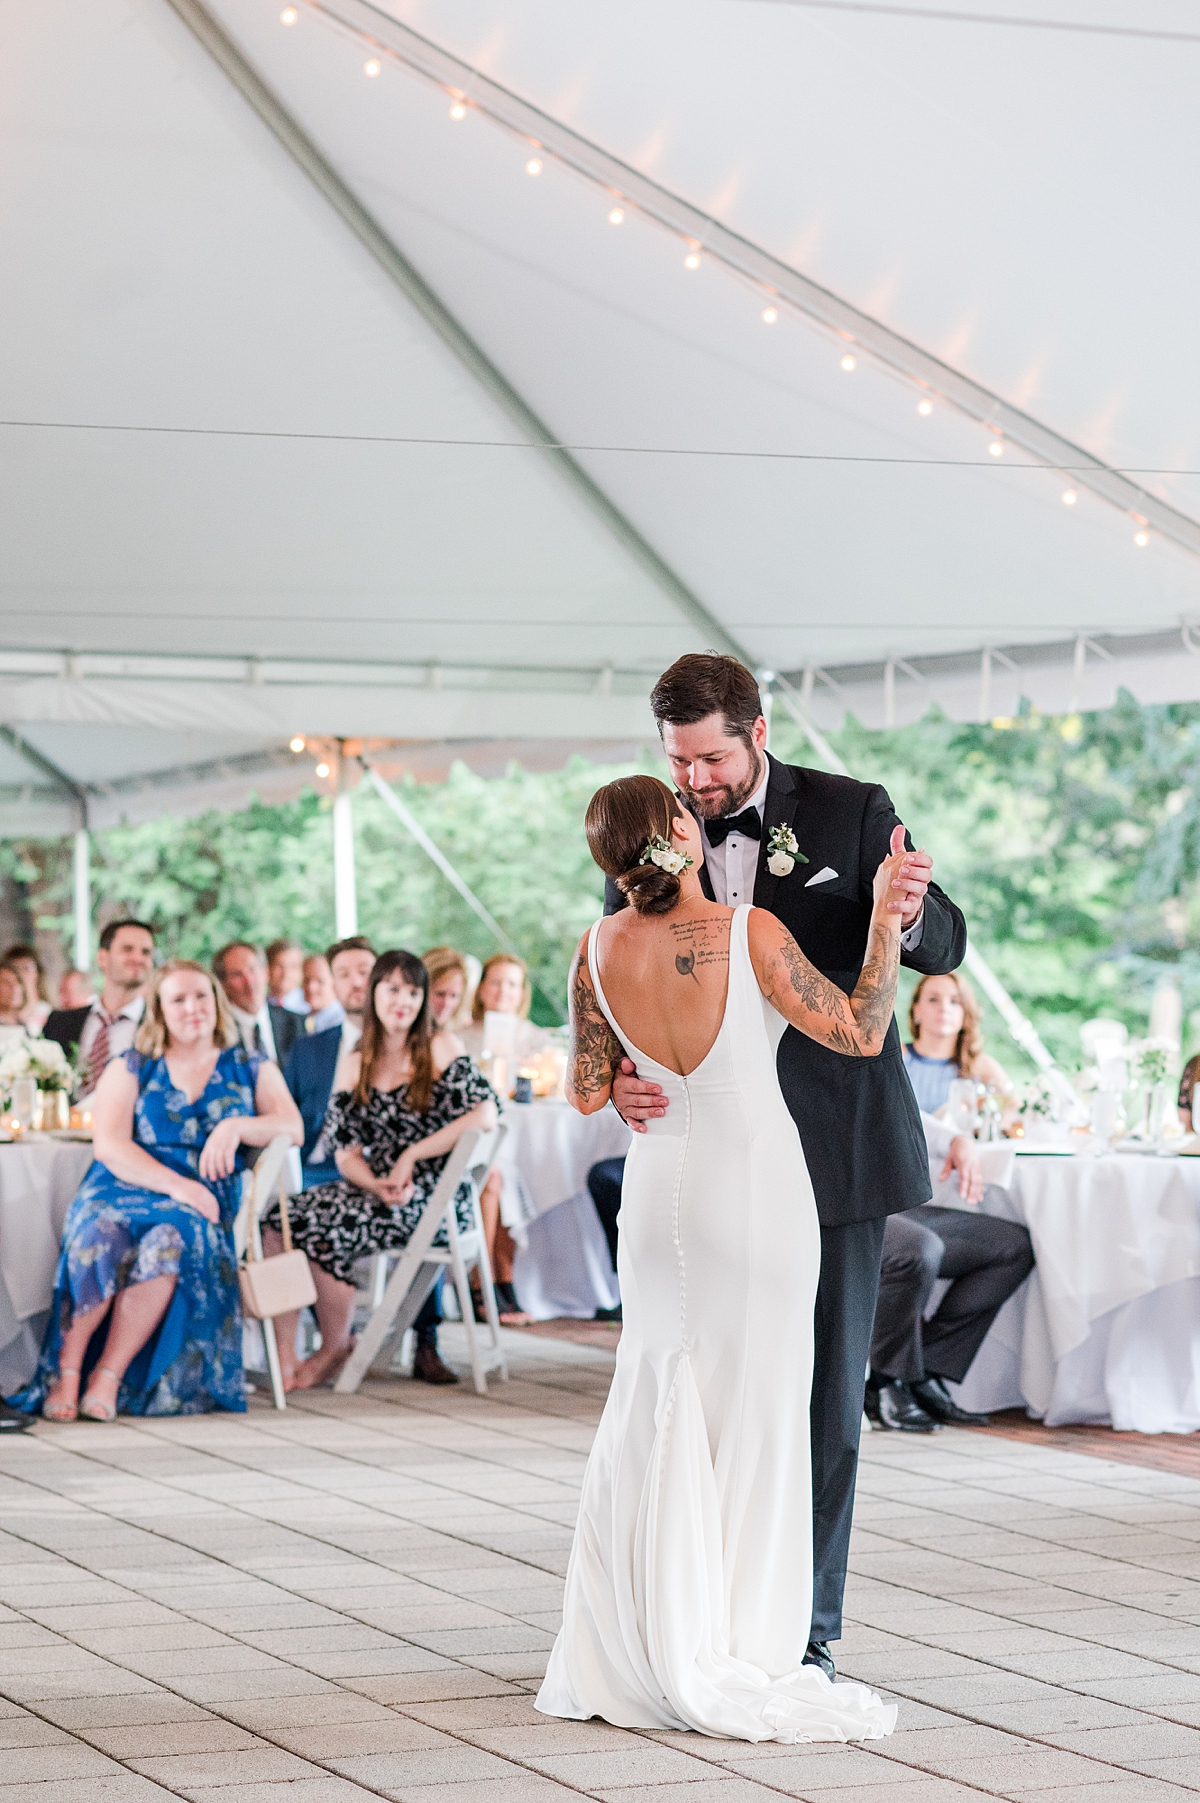 Bride and Groom First Dance During Lewis Ginter Botanical Garden Wedding Reception. Wedding Photography by Virginia Wedding Photographer Kailey Brianne Photography. 